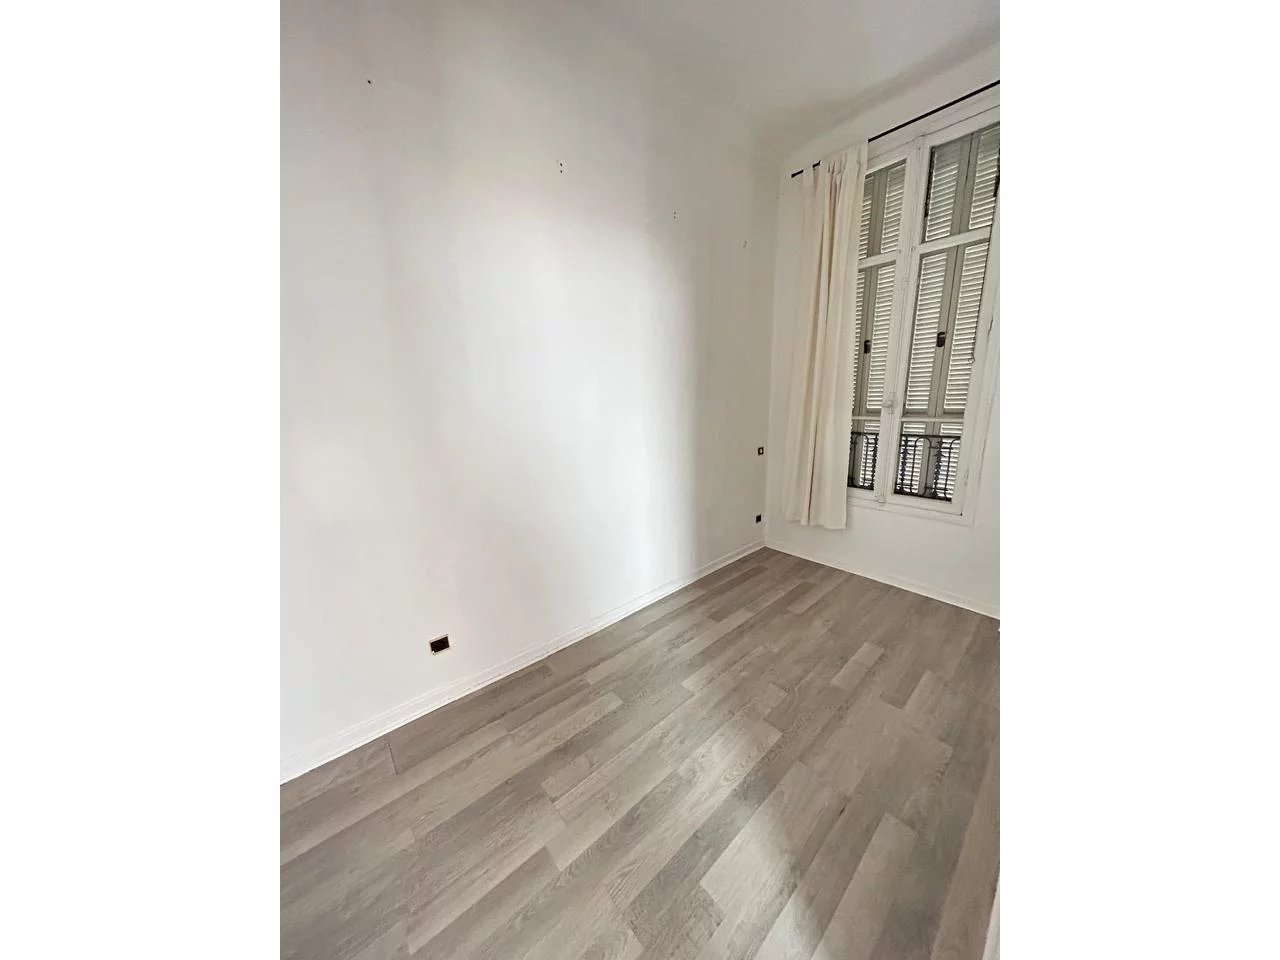 Appartement  2 Rooms 55m2  for sale   250 000 €